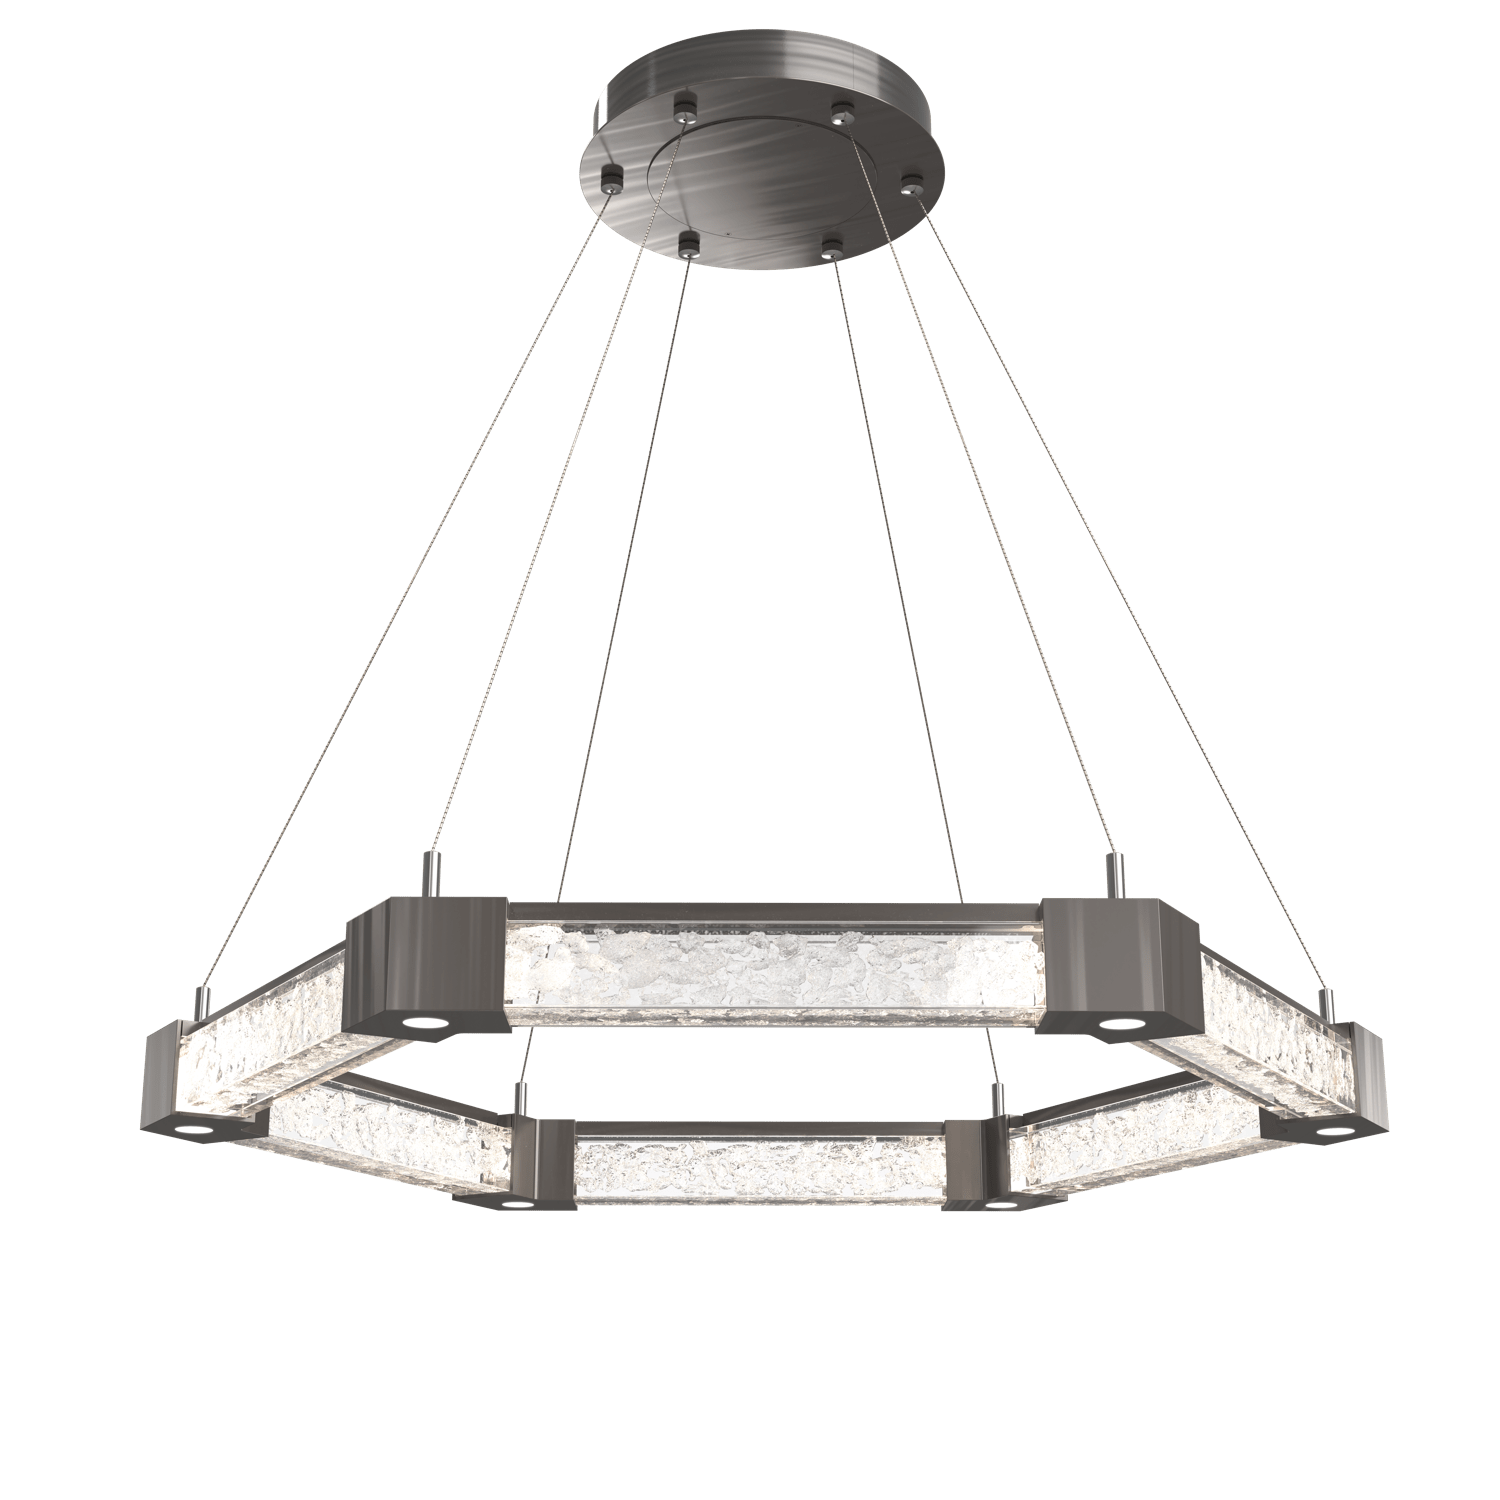 CHB0060-35-GM-GC-Hammerton-Studio-Axis-Hexagonal-Ring-Chandelier-with-Gunmetal-finish-and-clear-cast-glass-and-LED-lamping